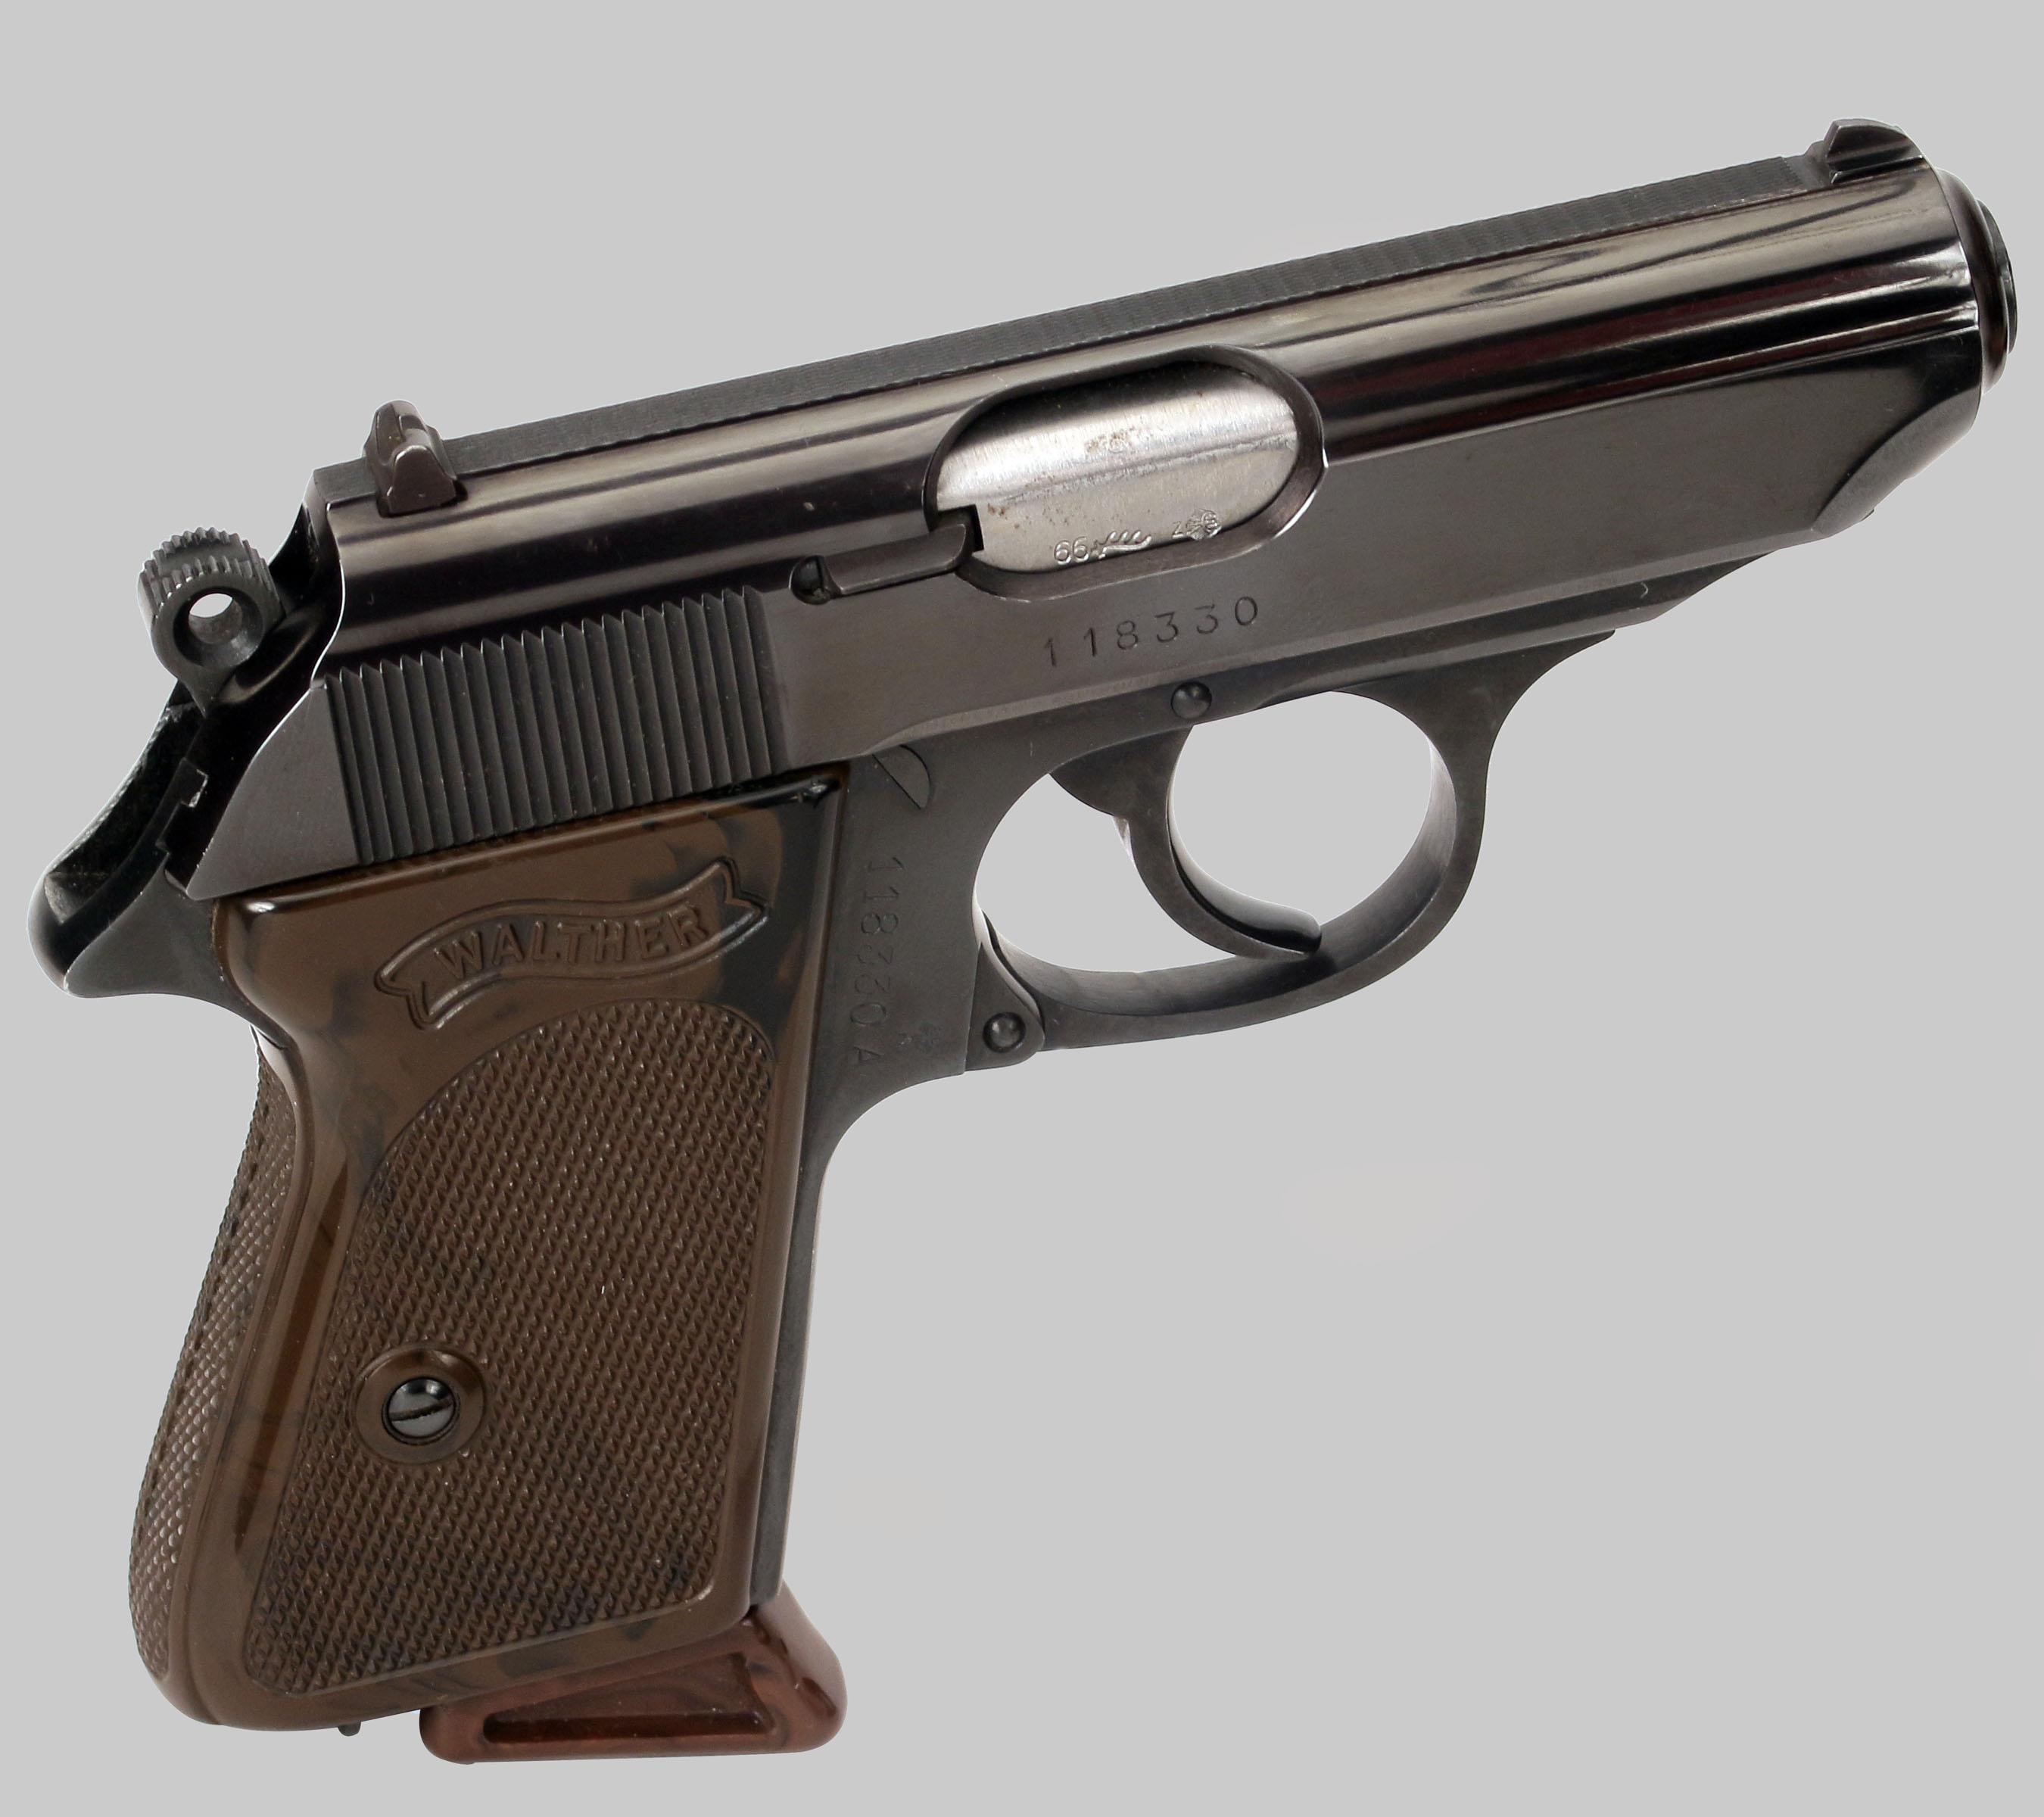 Walther PPK 9mm Pistol for sale